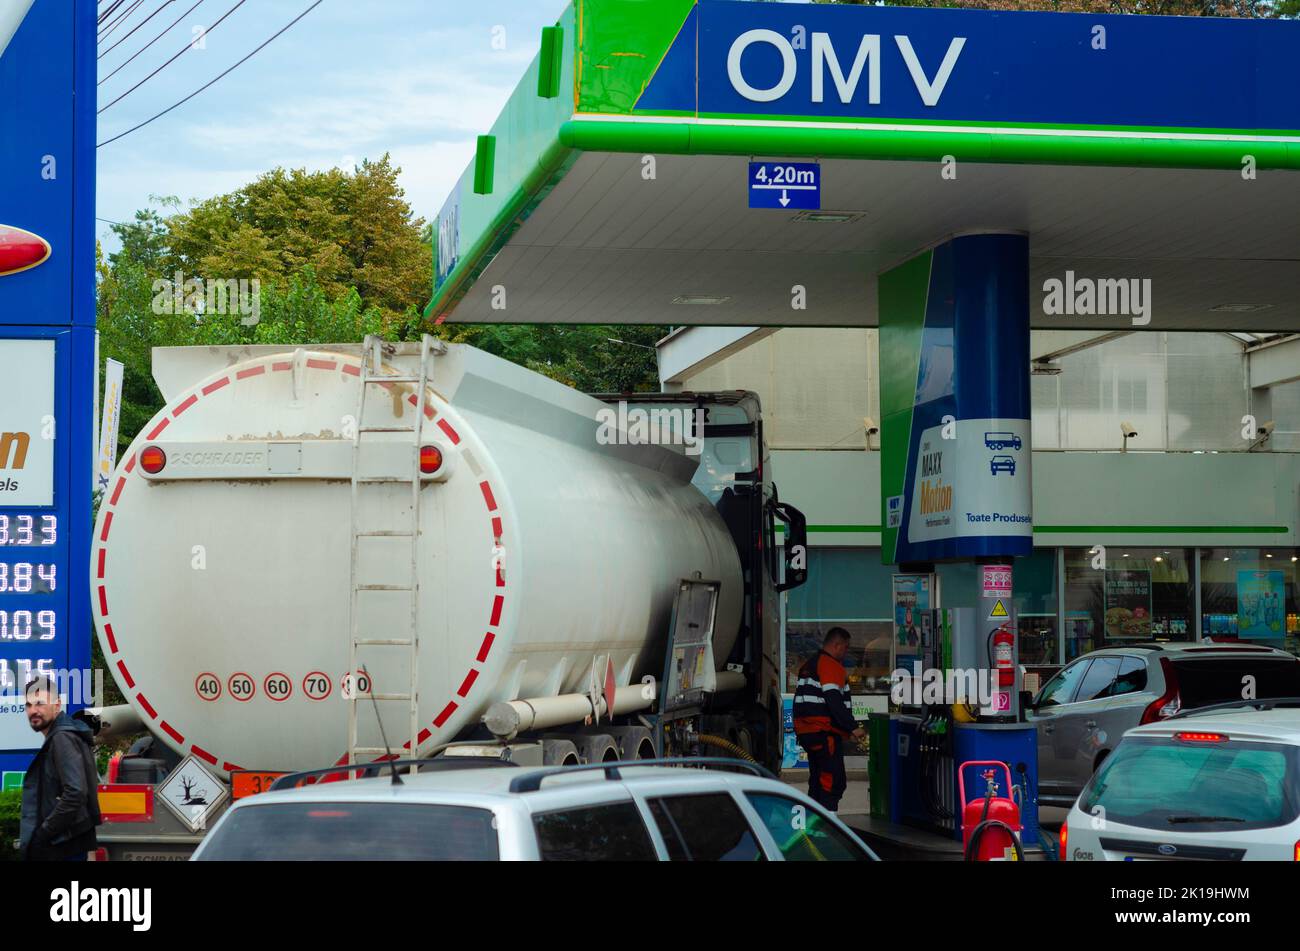 Bucharest, Romania - September 16, 2022: A Omv gas station in Bucharest. Diesel tank at the gas station. Editorial stock photo - stock image Stock Photo